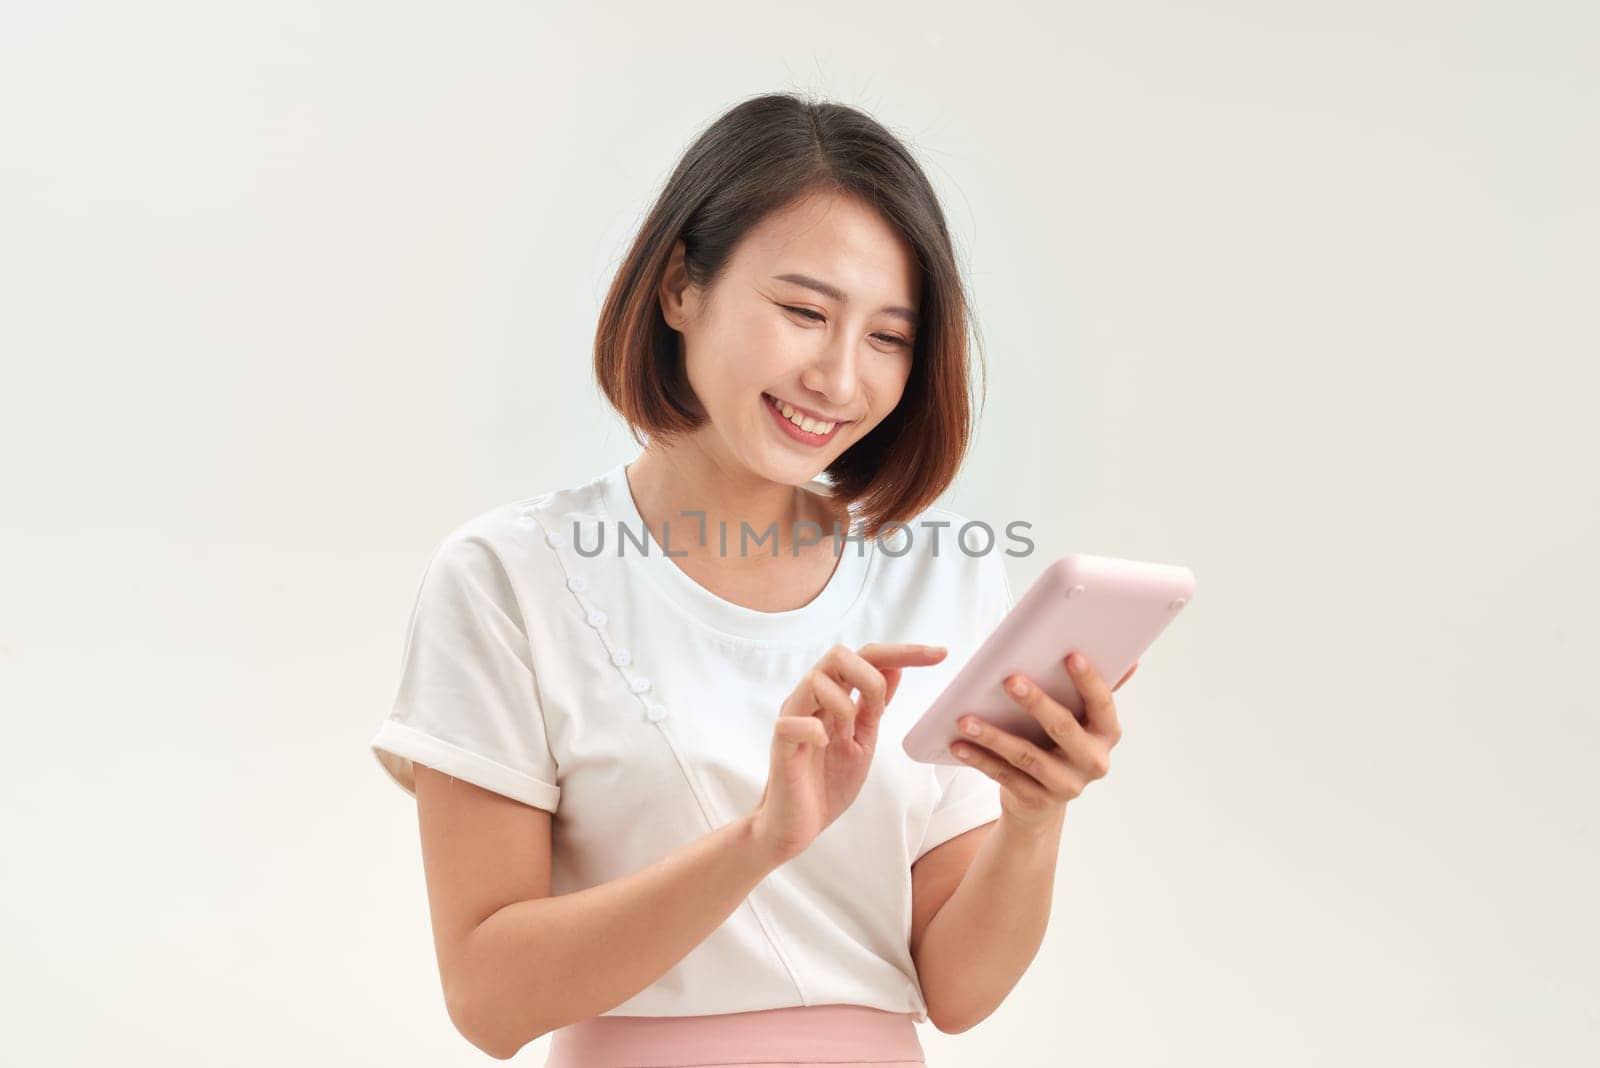 young woman with calculator, isolated on white background